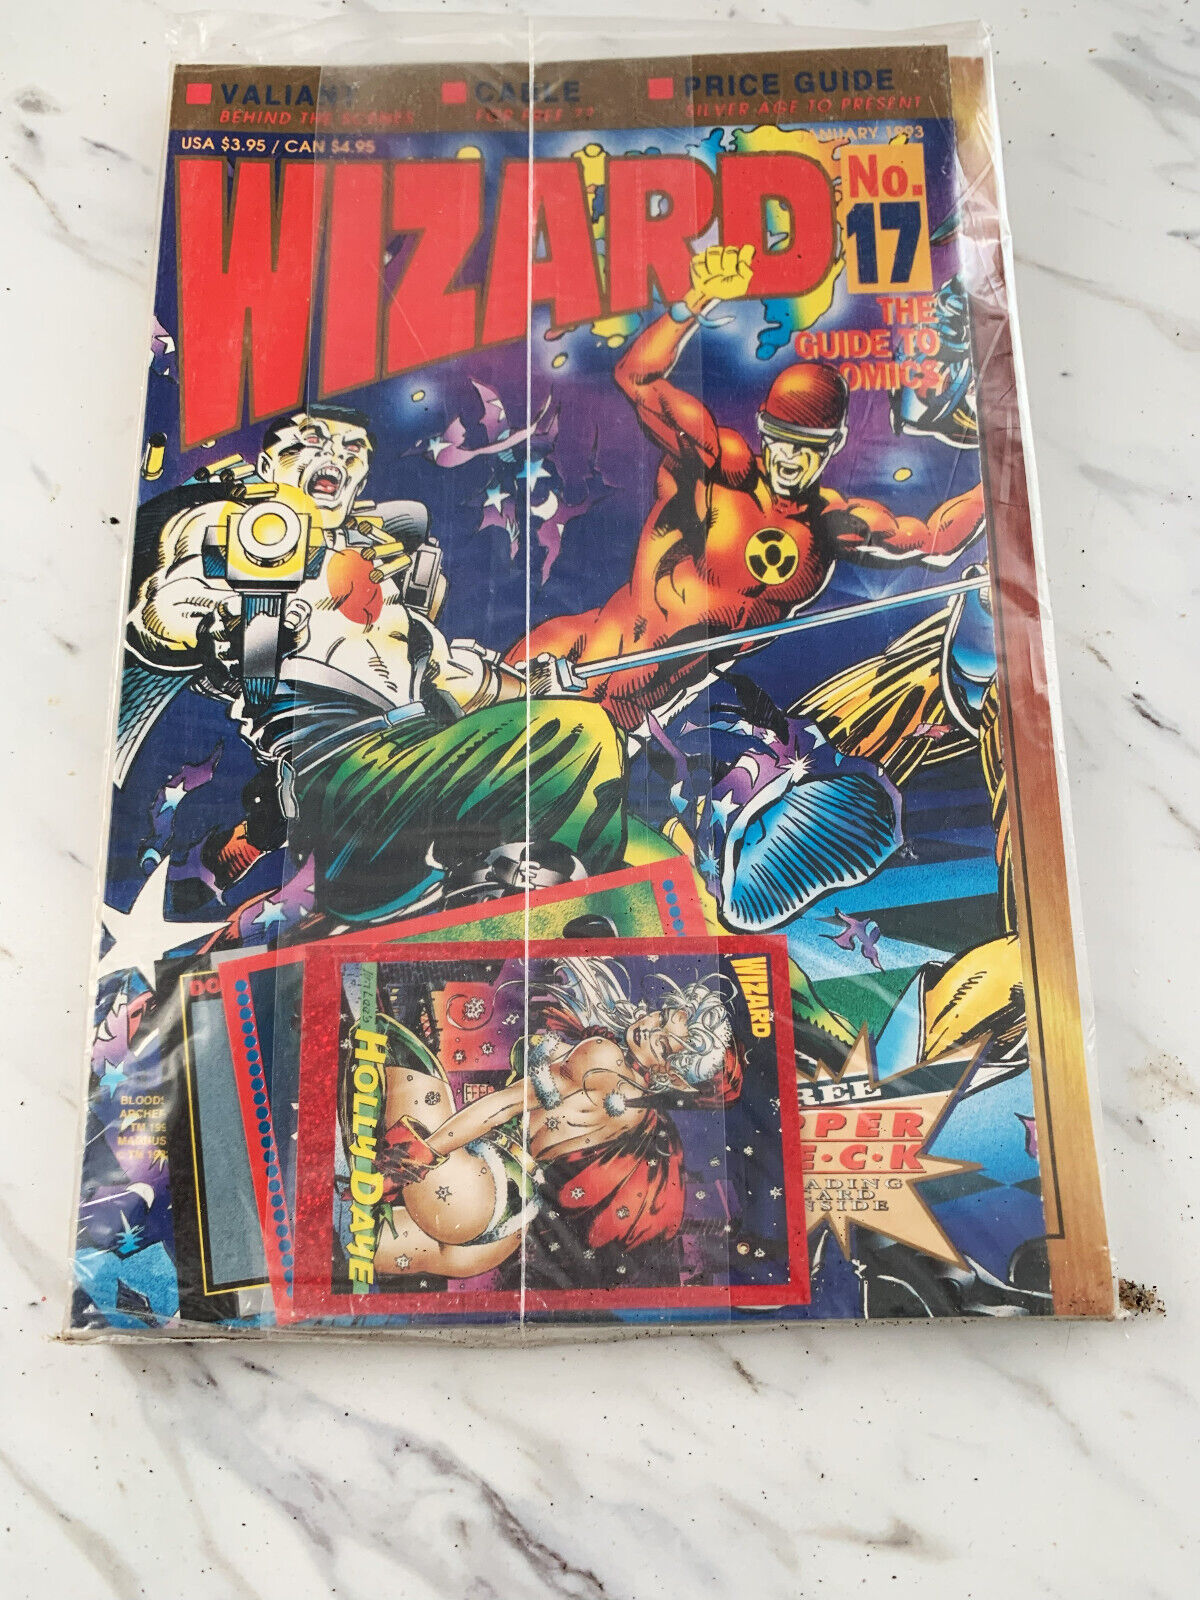 Wizard Magazine #17 January 1993 Factory Sealed With Inserts